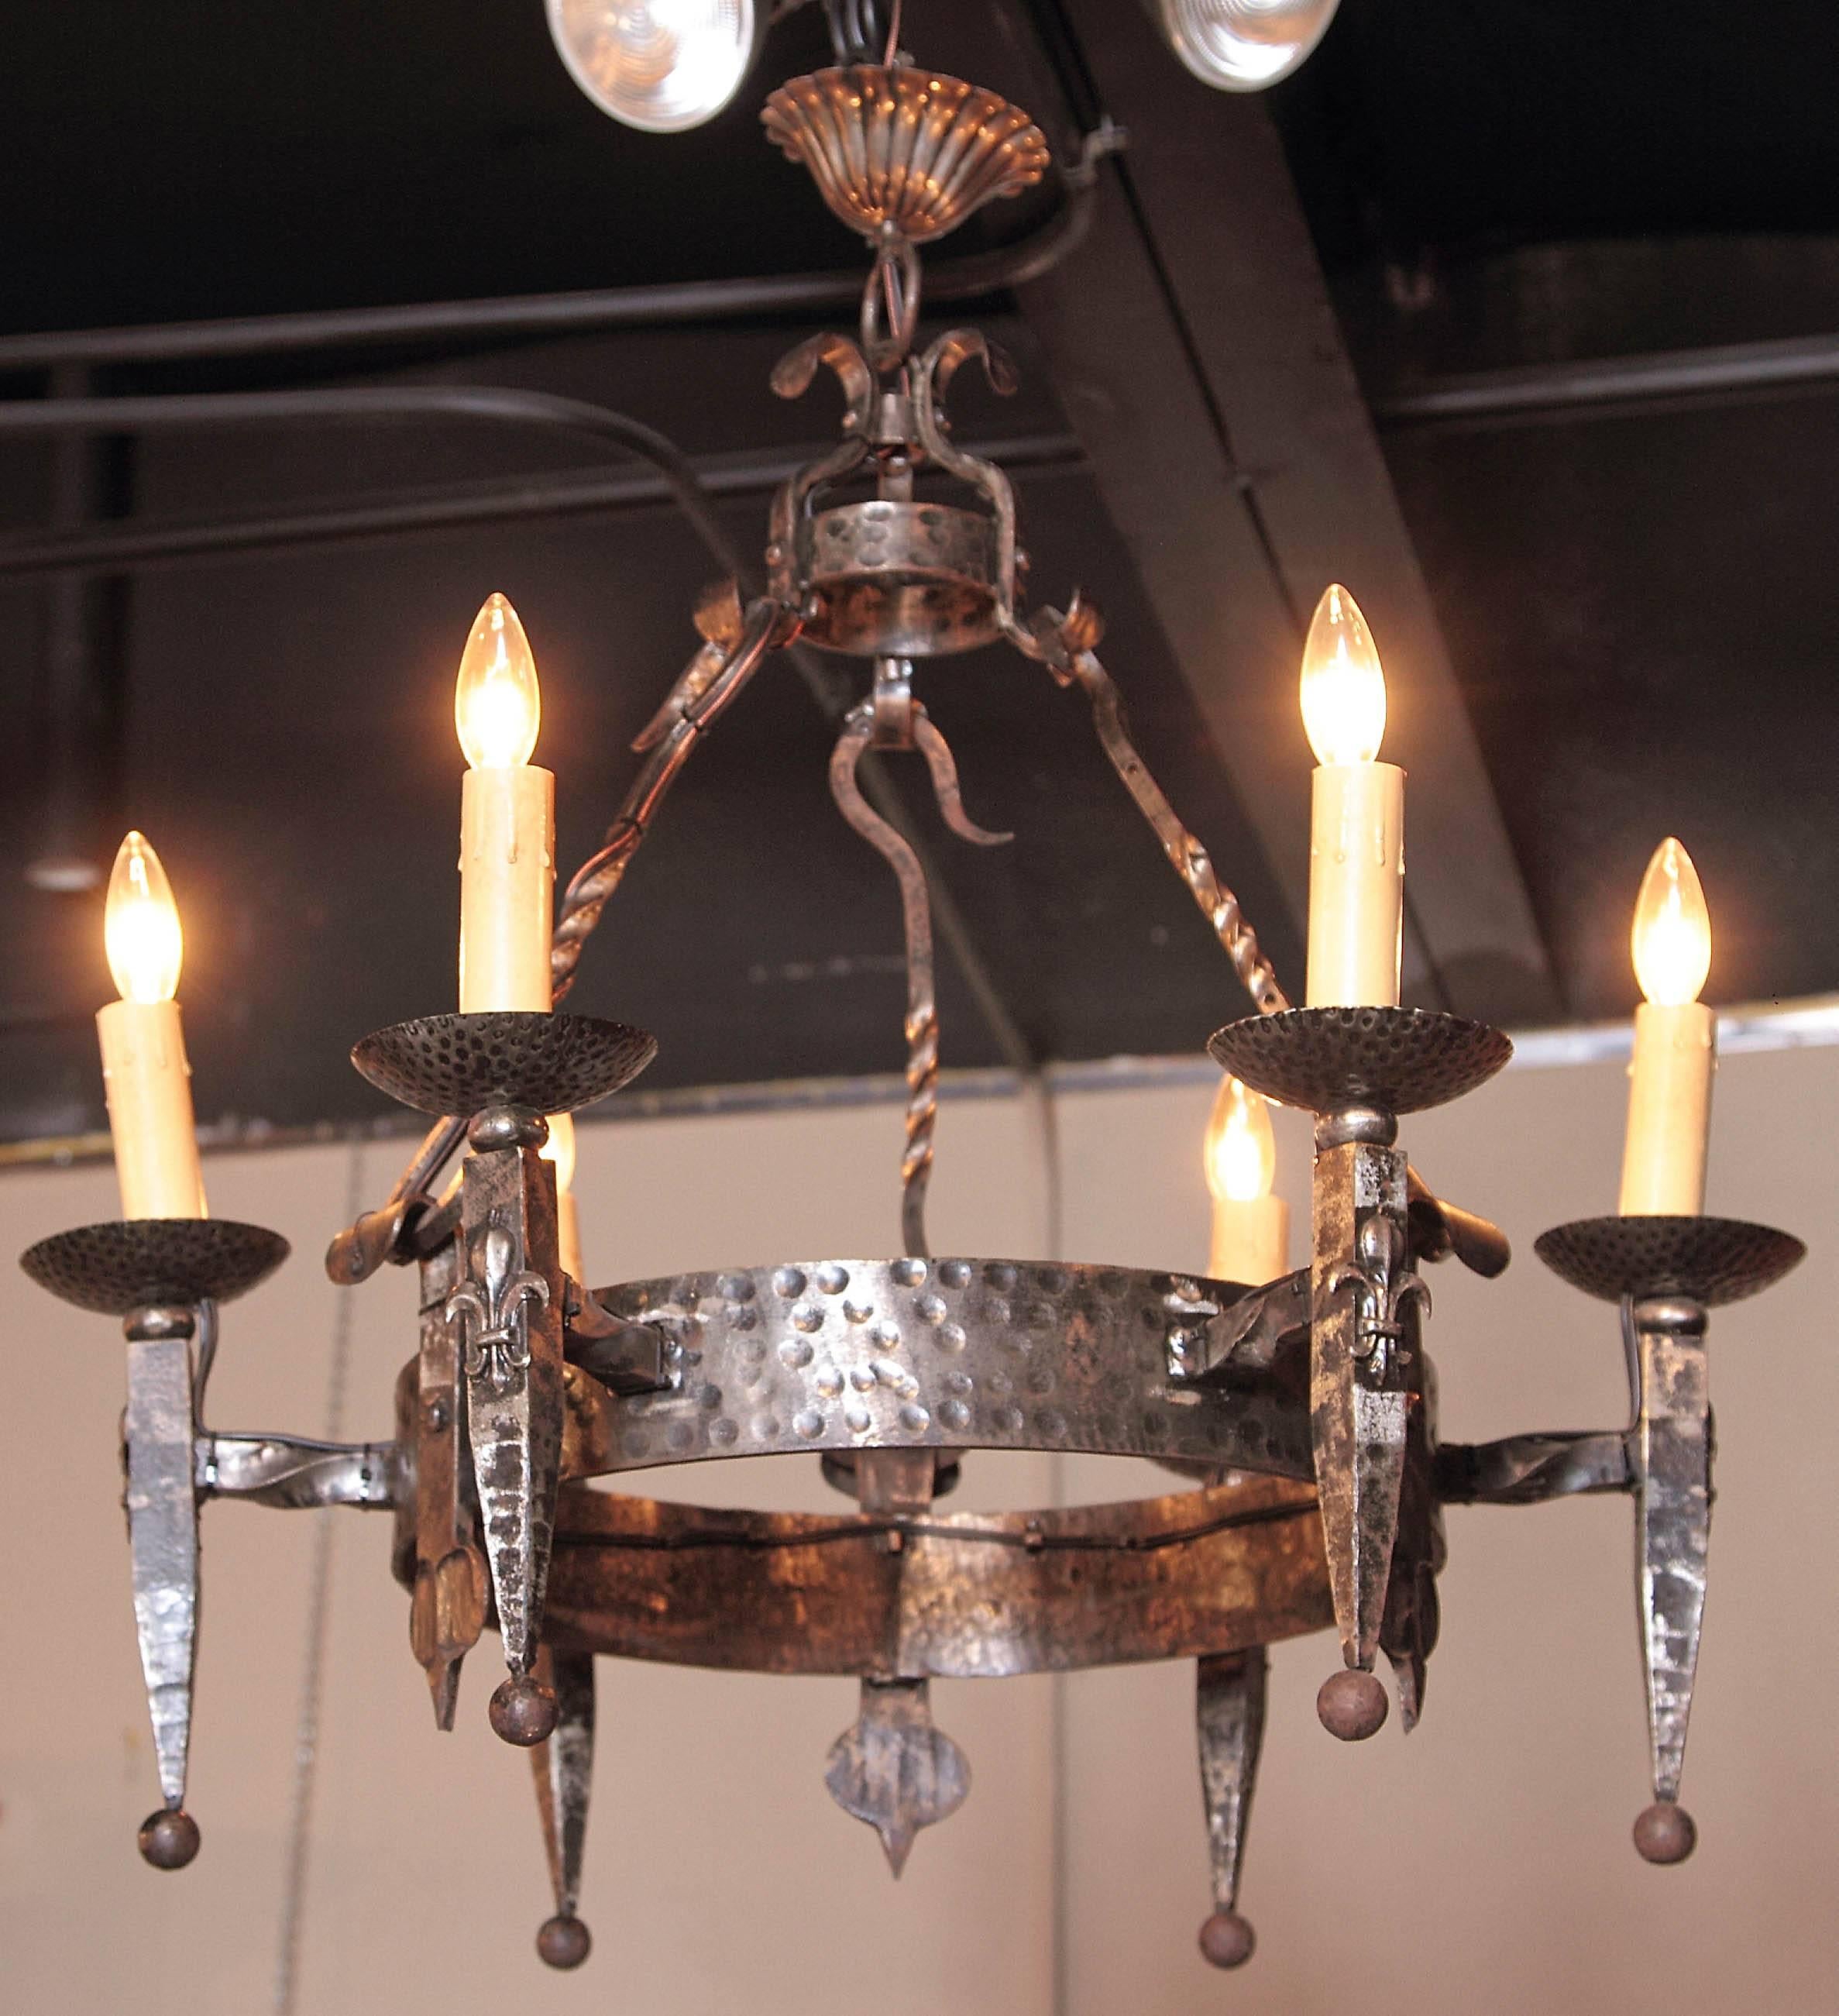 This elegant, Gothic chandelier was crafted in France, circa 1900. Round in shape and forged from wrought iron, the antique light fixture has six newly wired lights decorated with decorative candle sleeves; the overhead chandelier is embellished